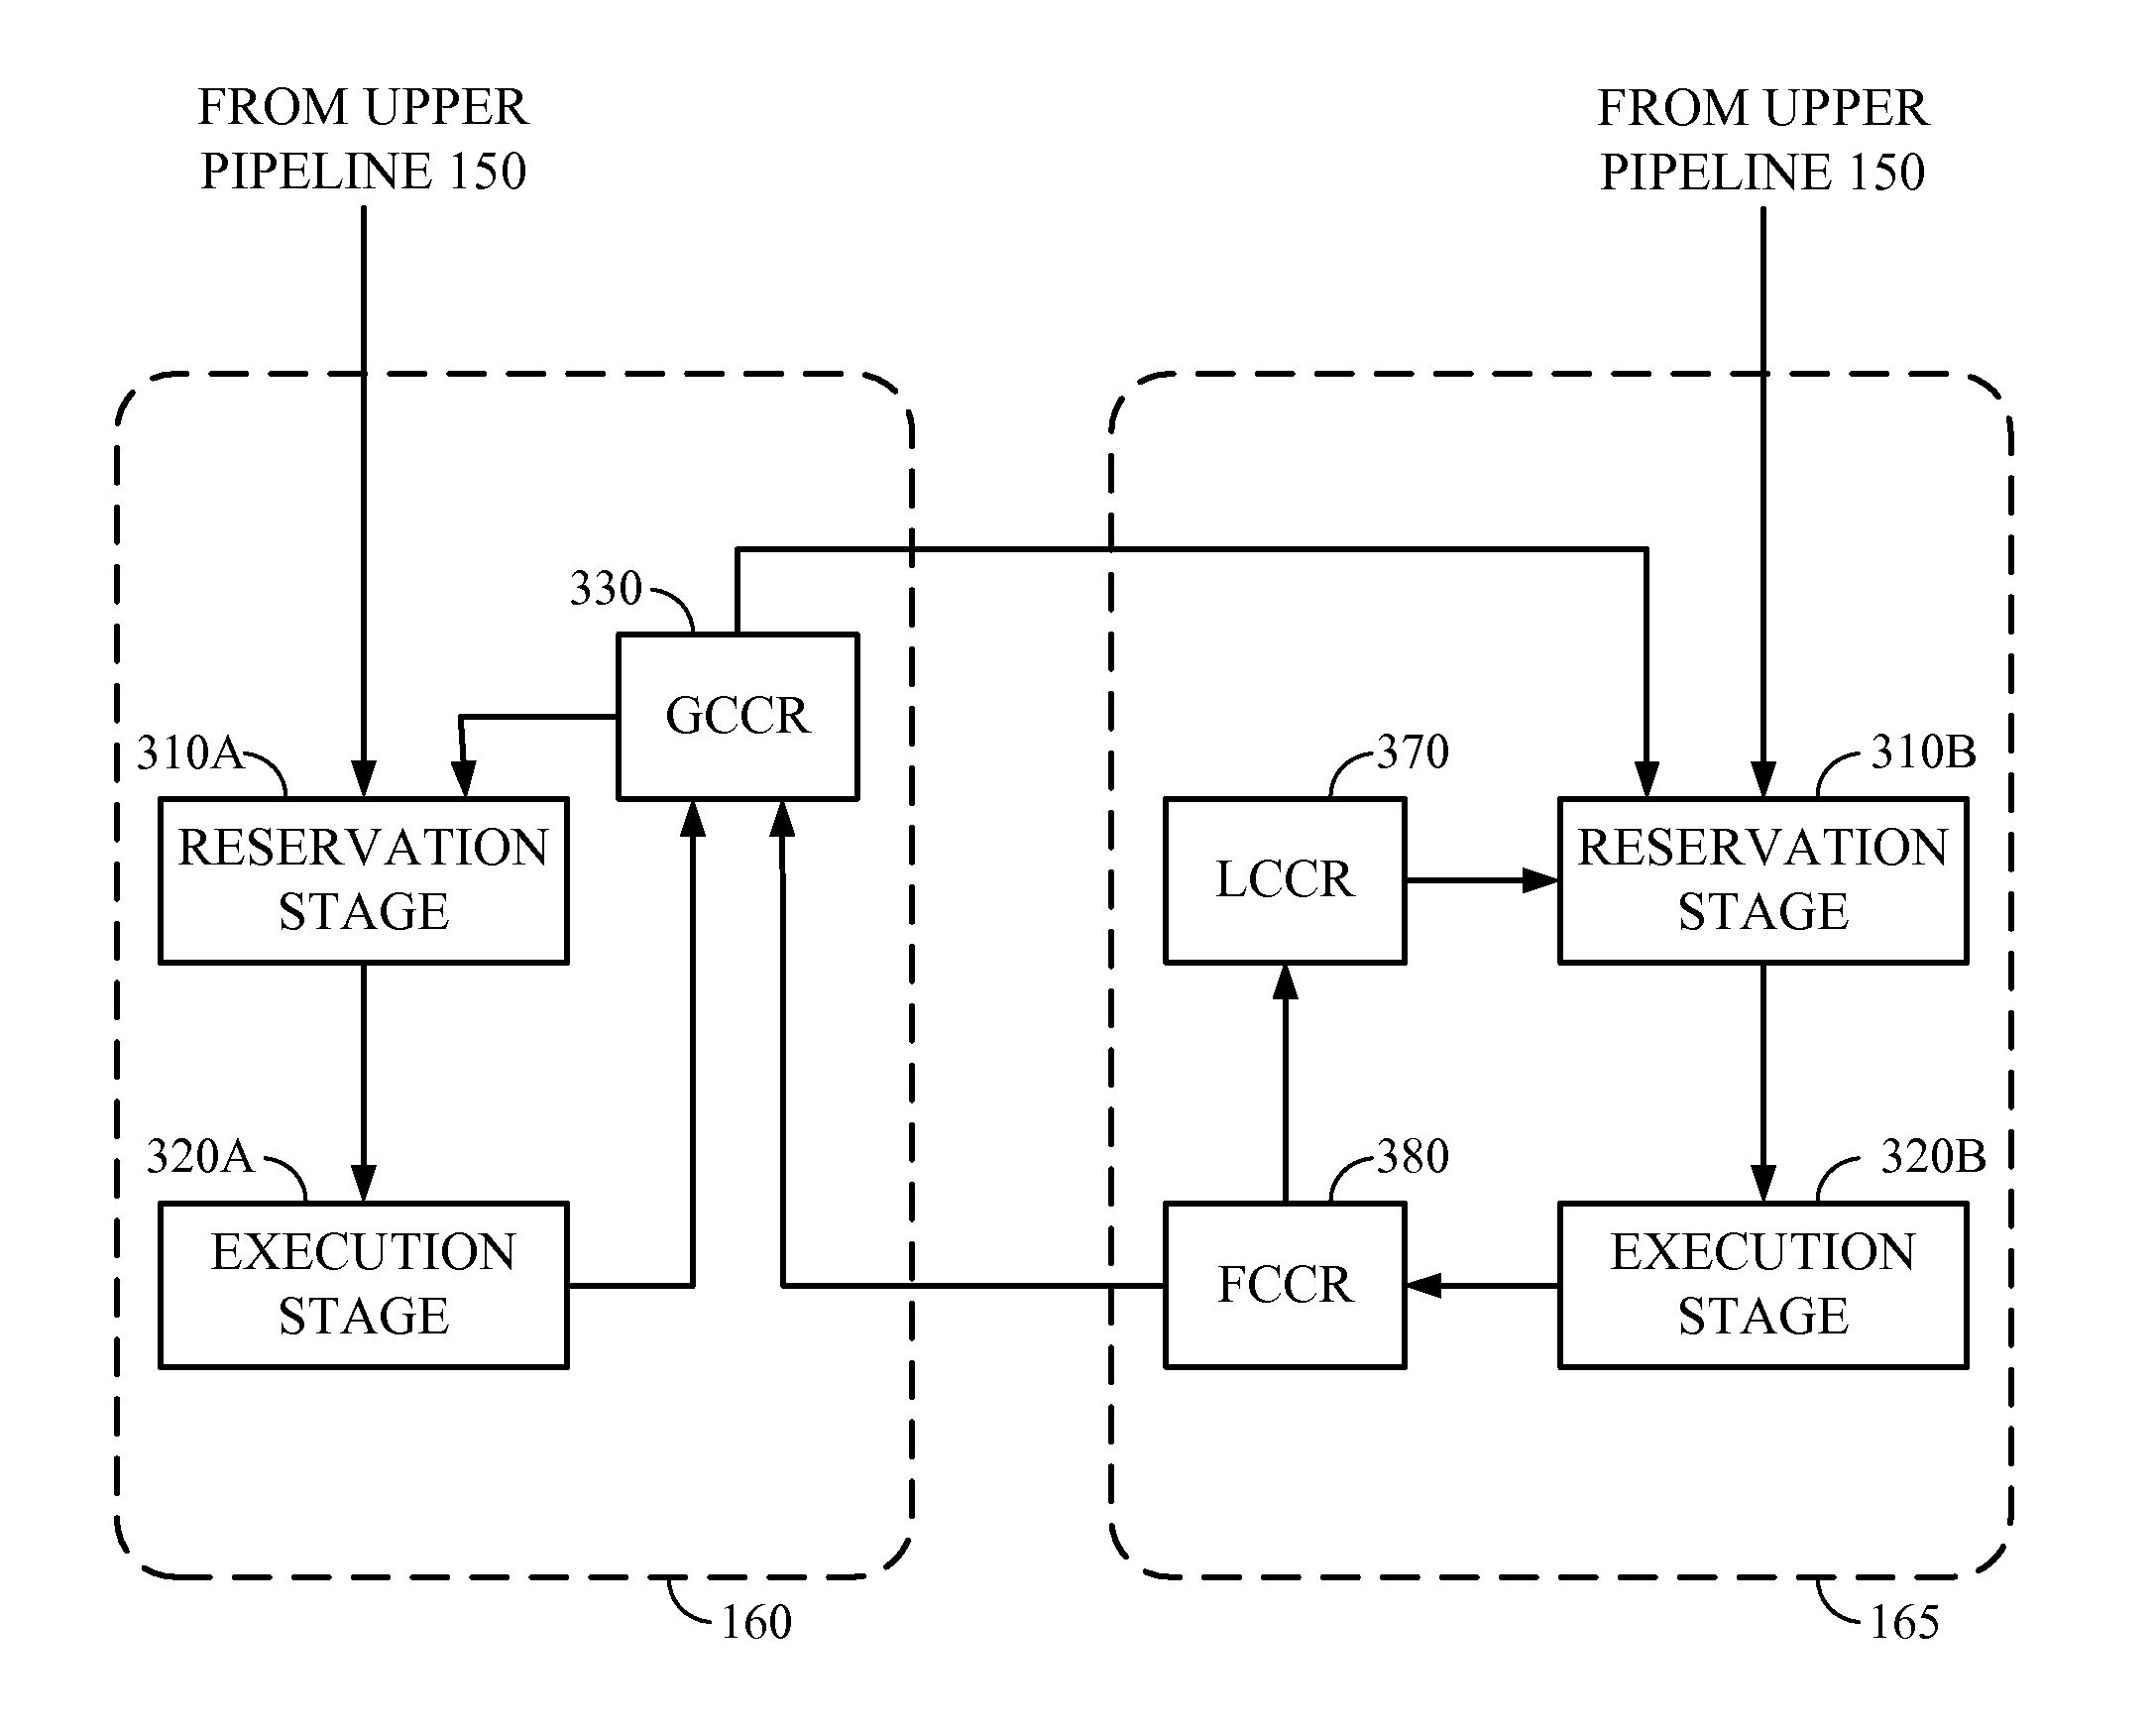 System and method for using a local condition code register for accelerating conditional instruction execution in a pipeline processor